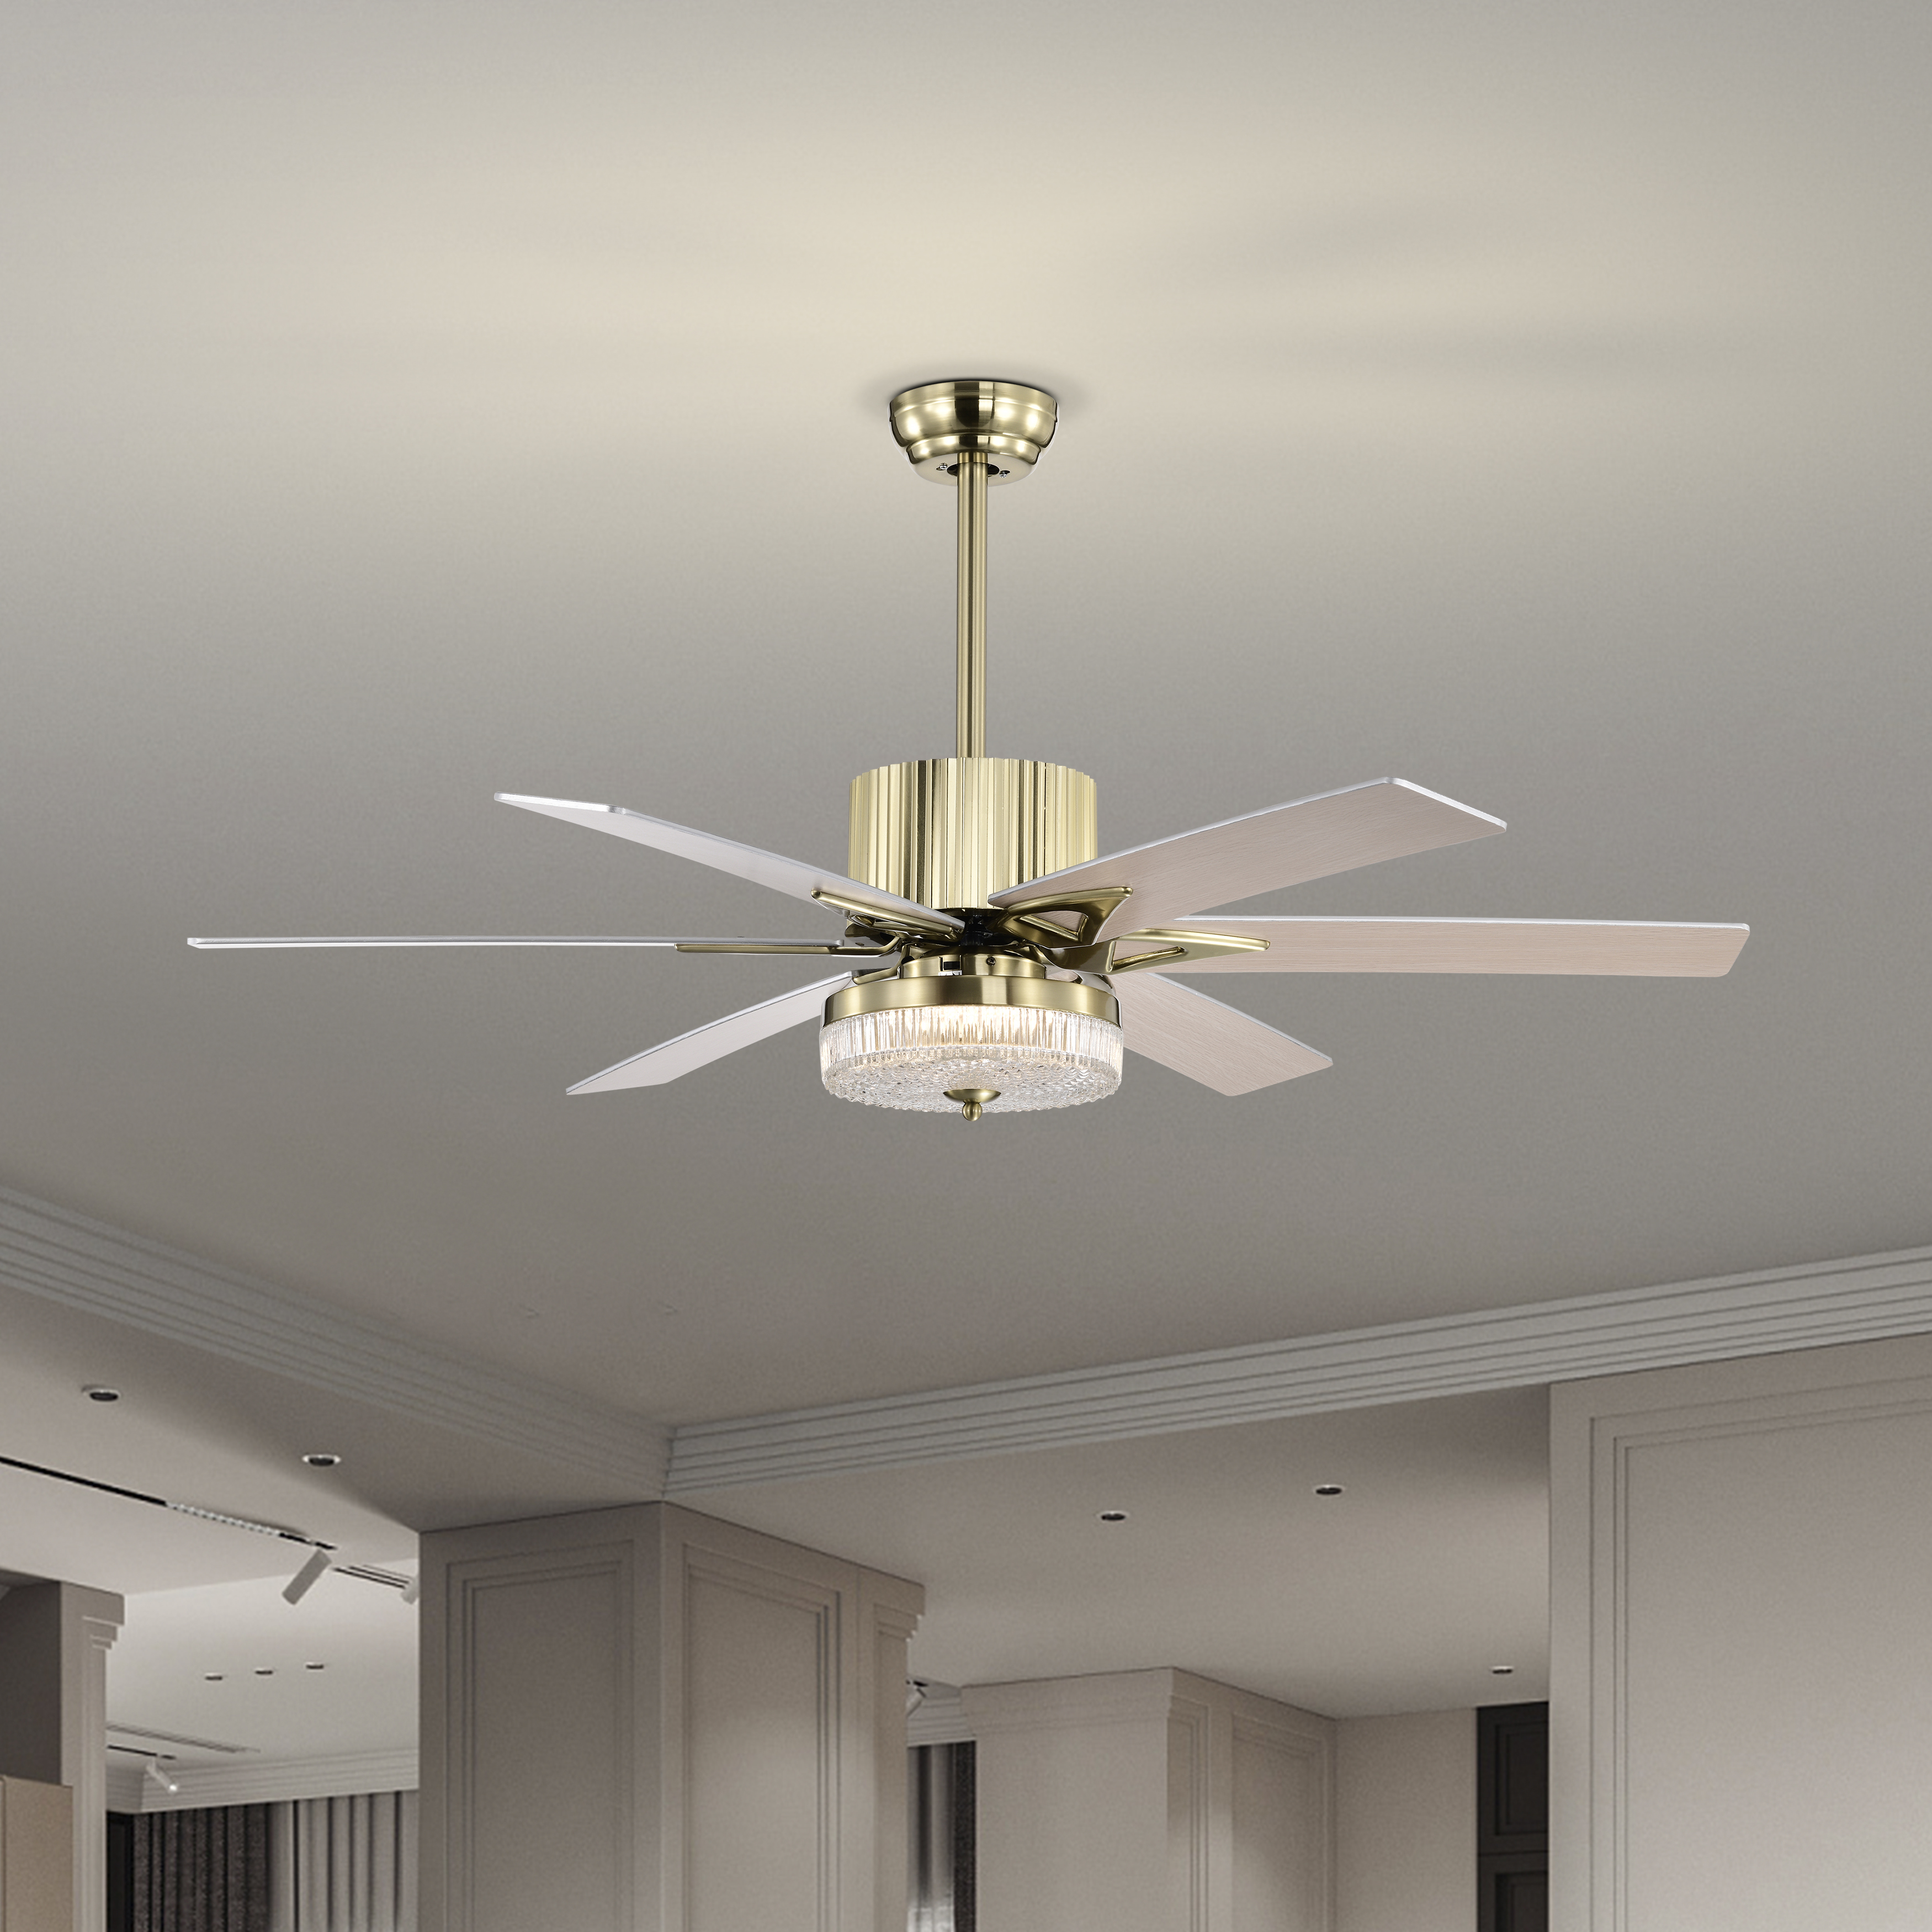 52" Ceiling Fan LED Light Timer Remote Control Reverse Airflow Indoor Outdoor